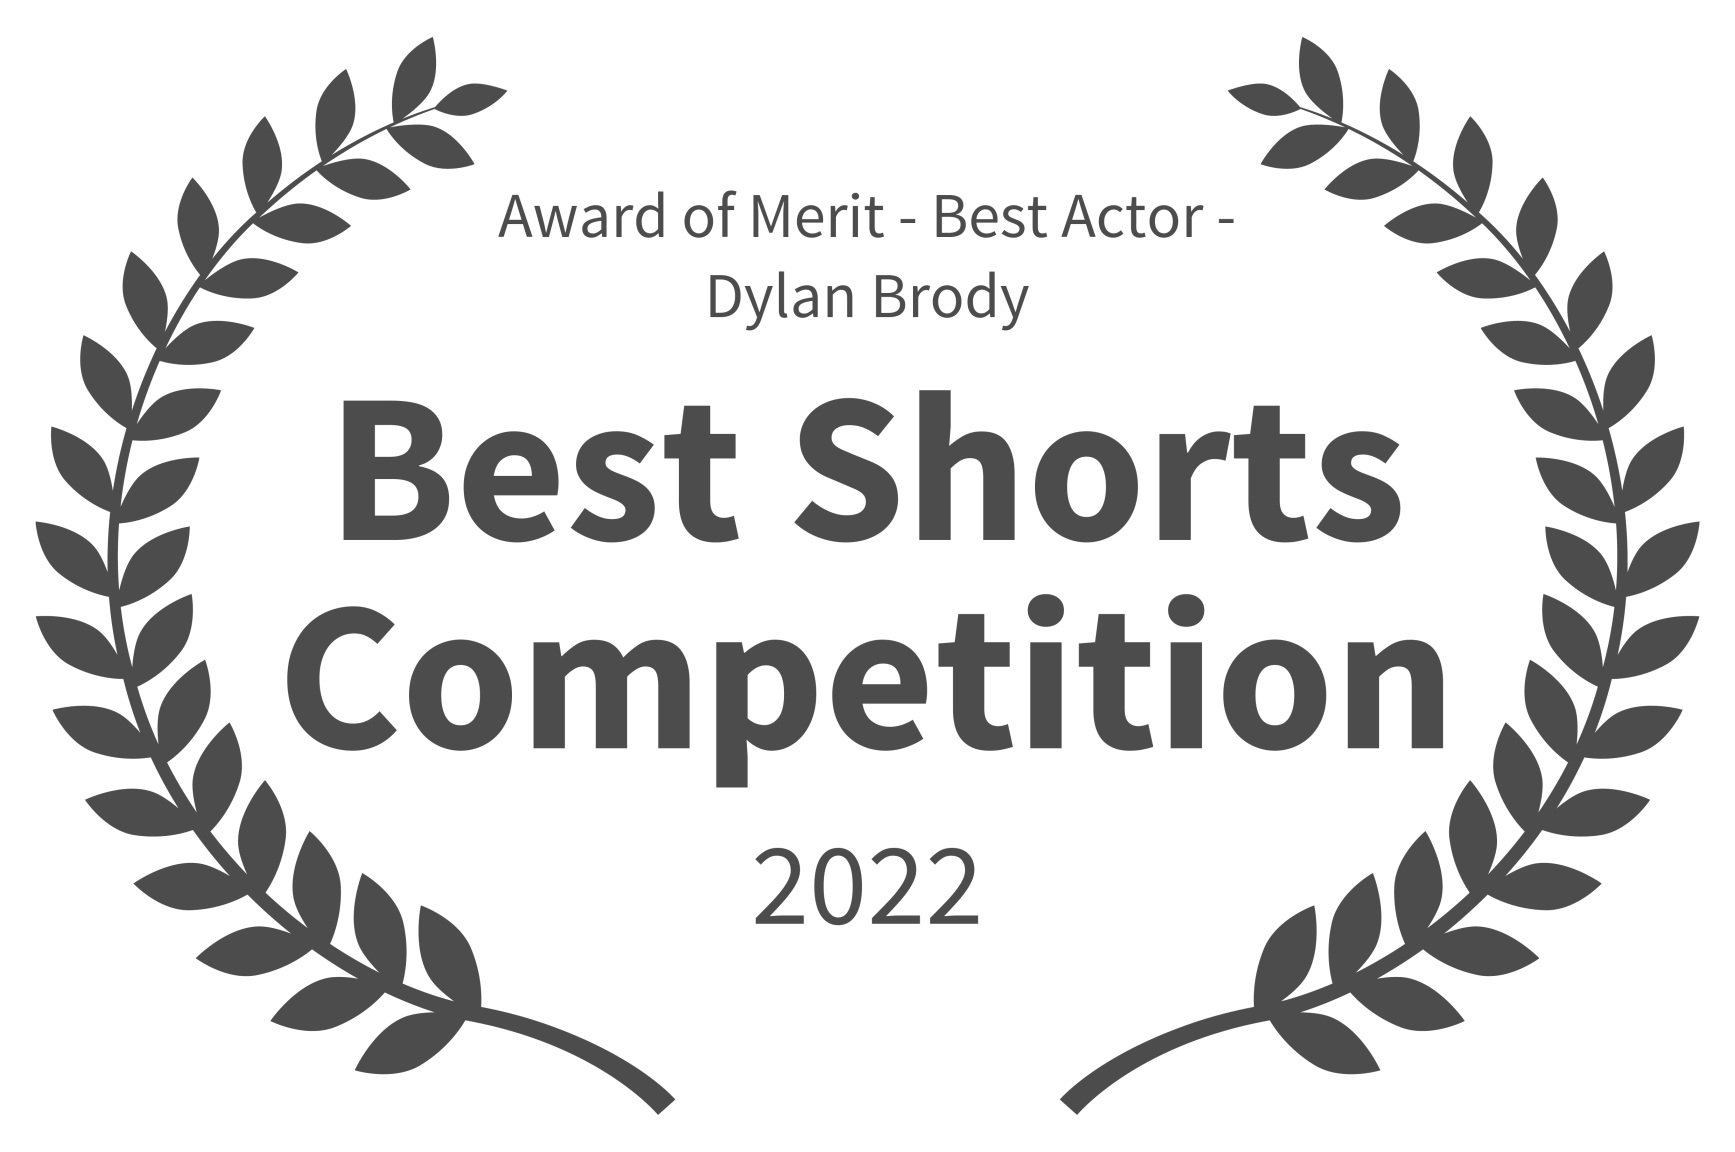 Award+of+Merit+-+Best+Actor+-+Dylan+Brody+-+Best+Shorts+Competition+-+2022.jpg